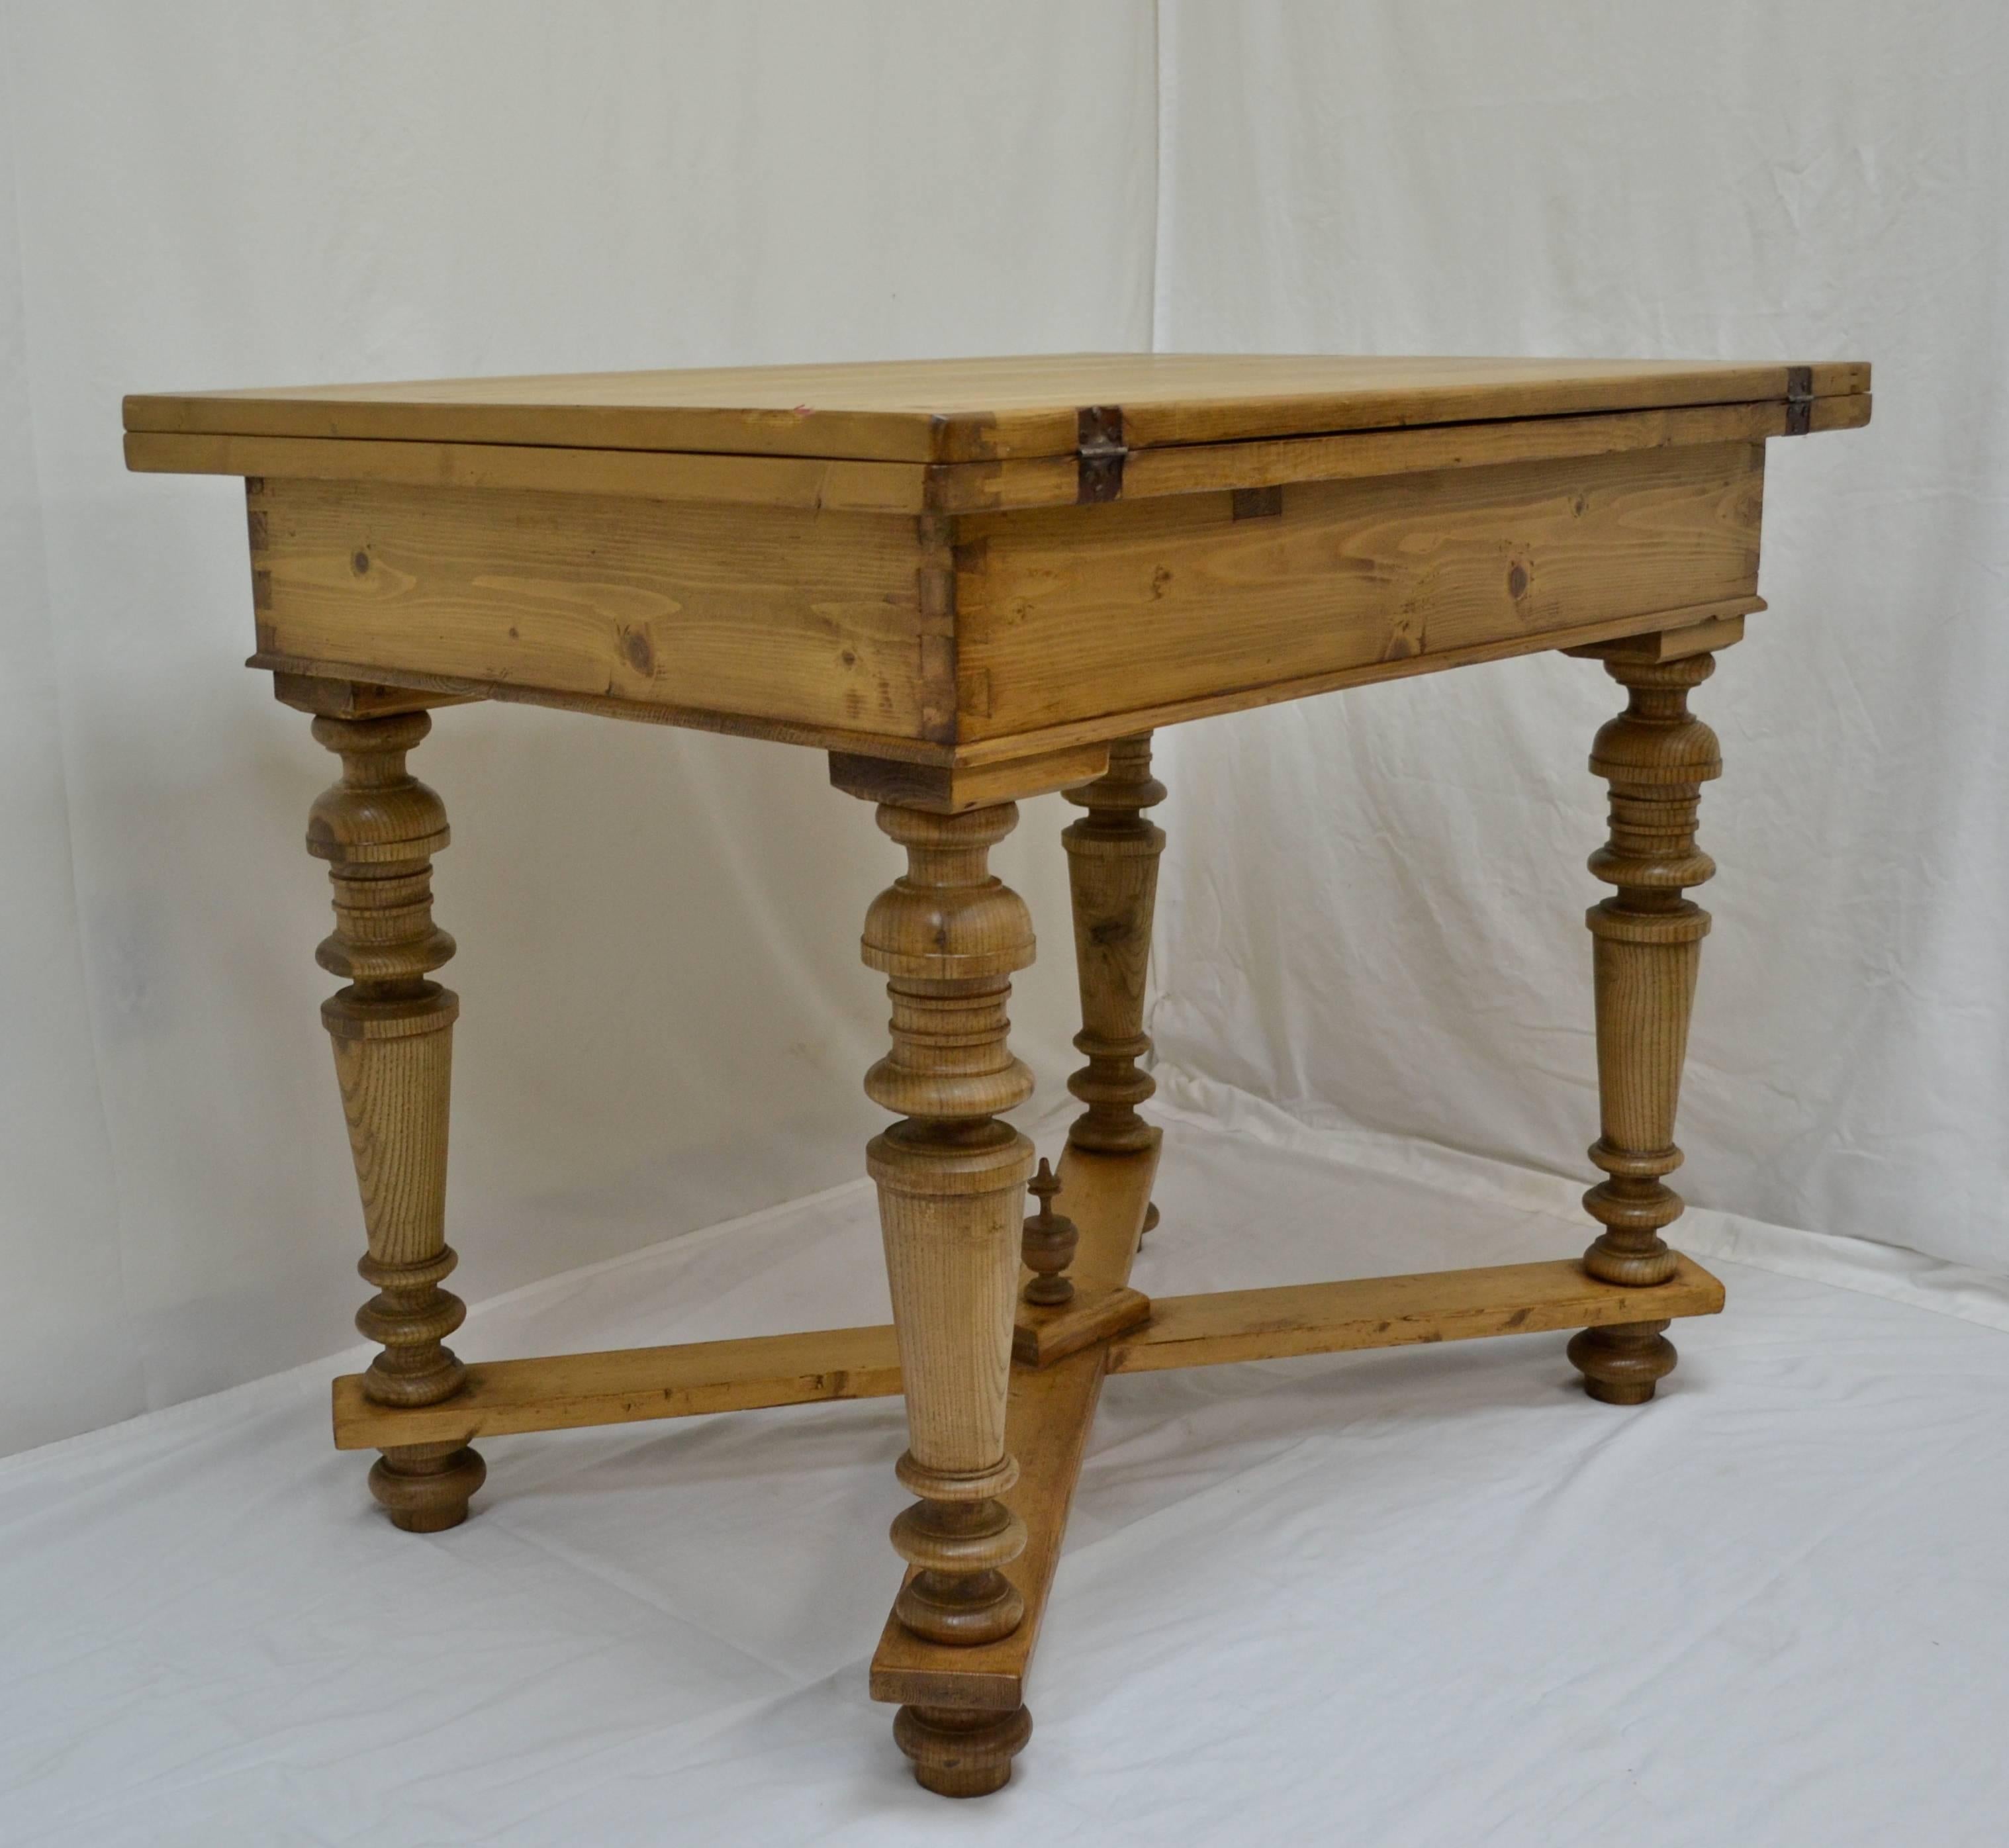 Hungarian Pine Swivel-Top Stretcher Base Table